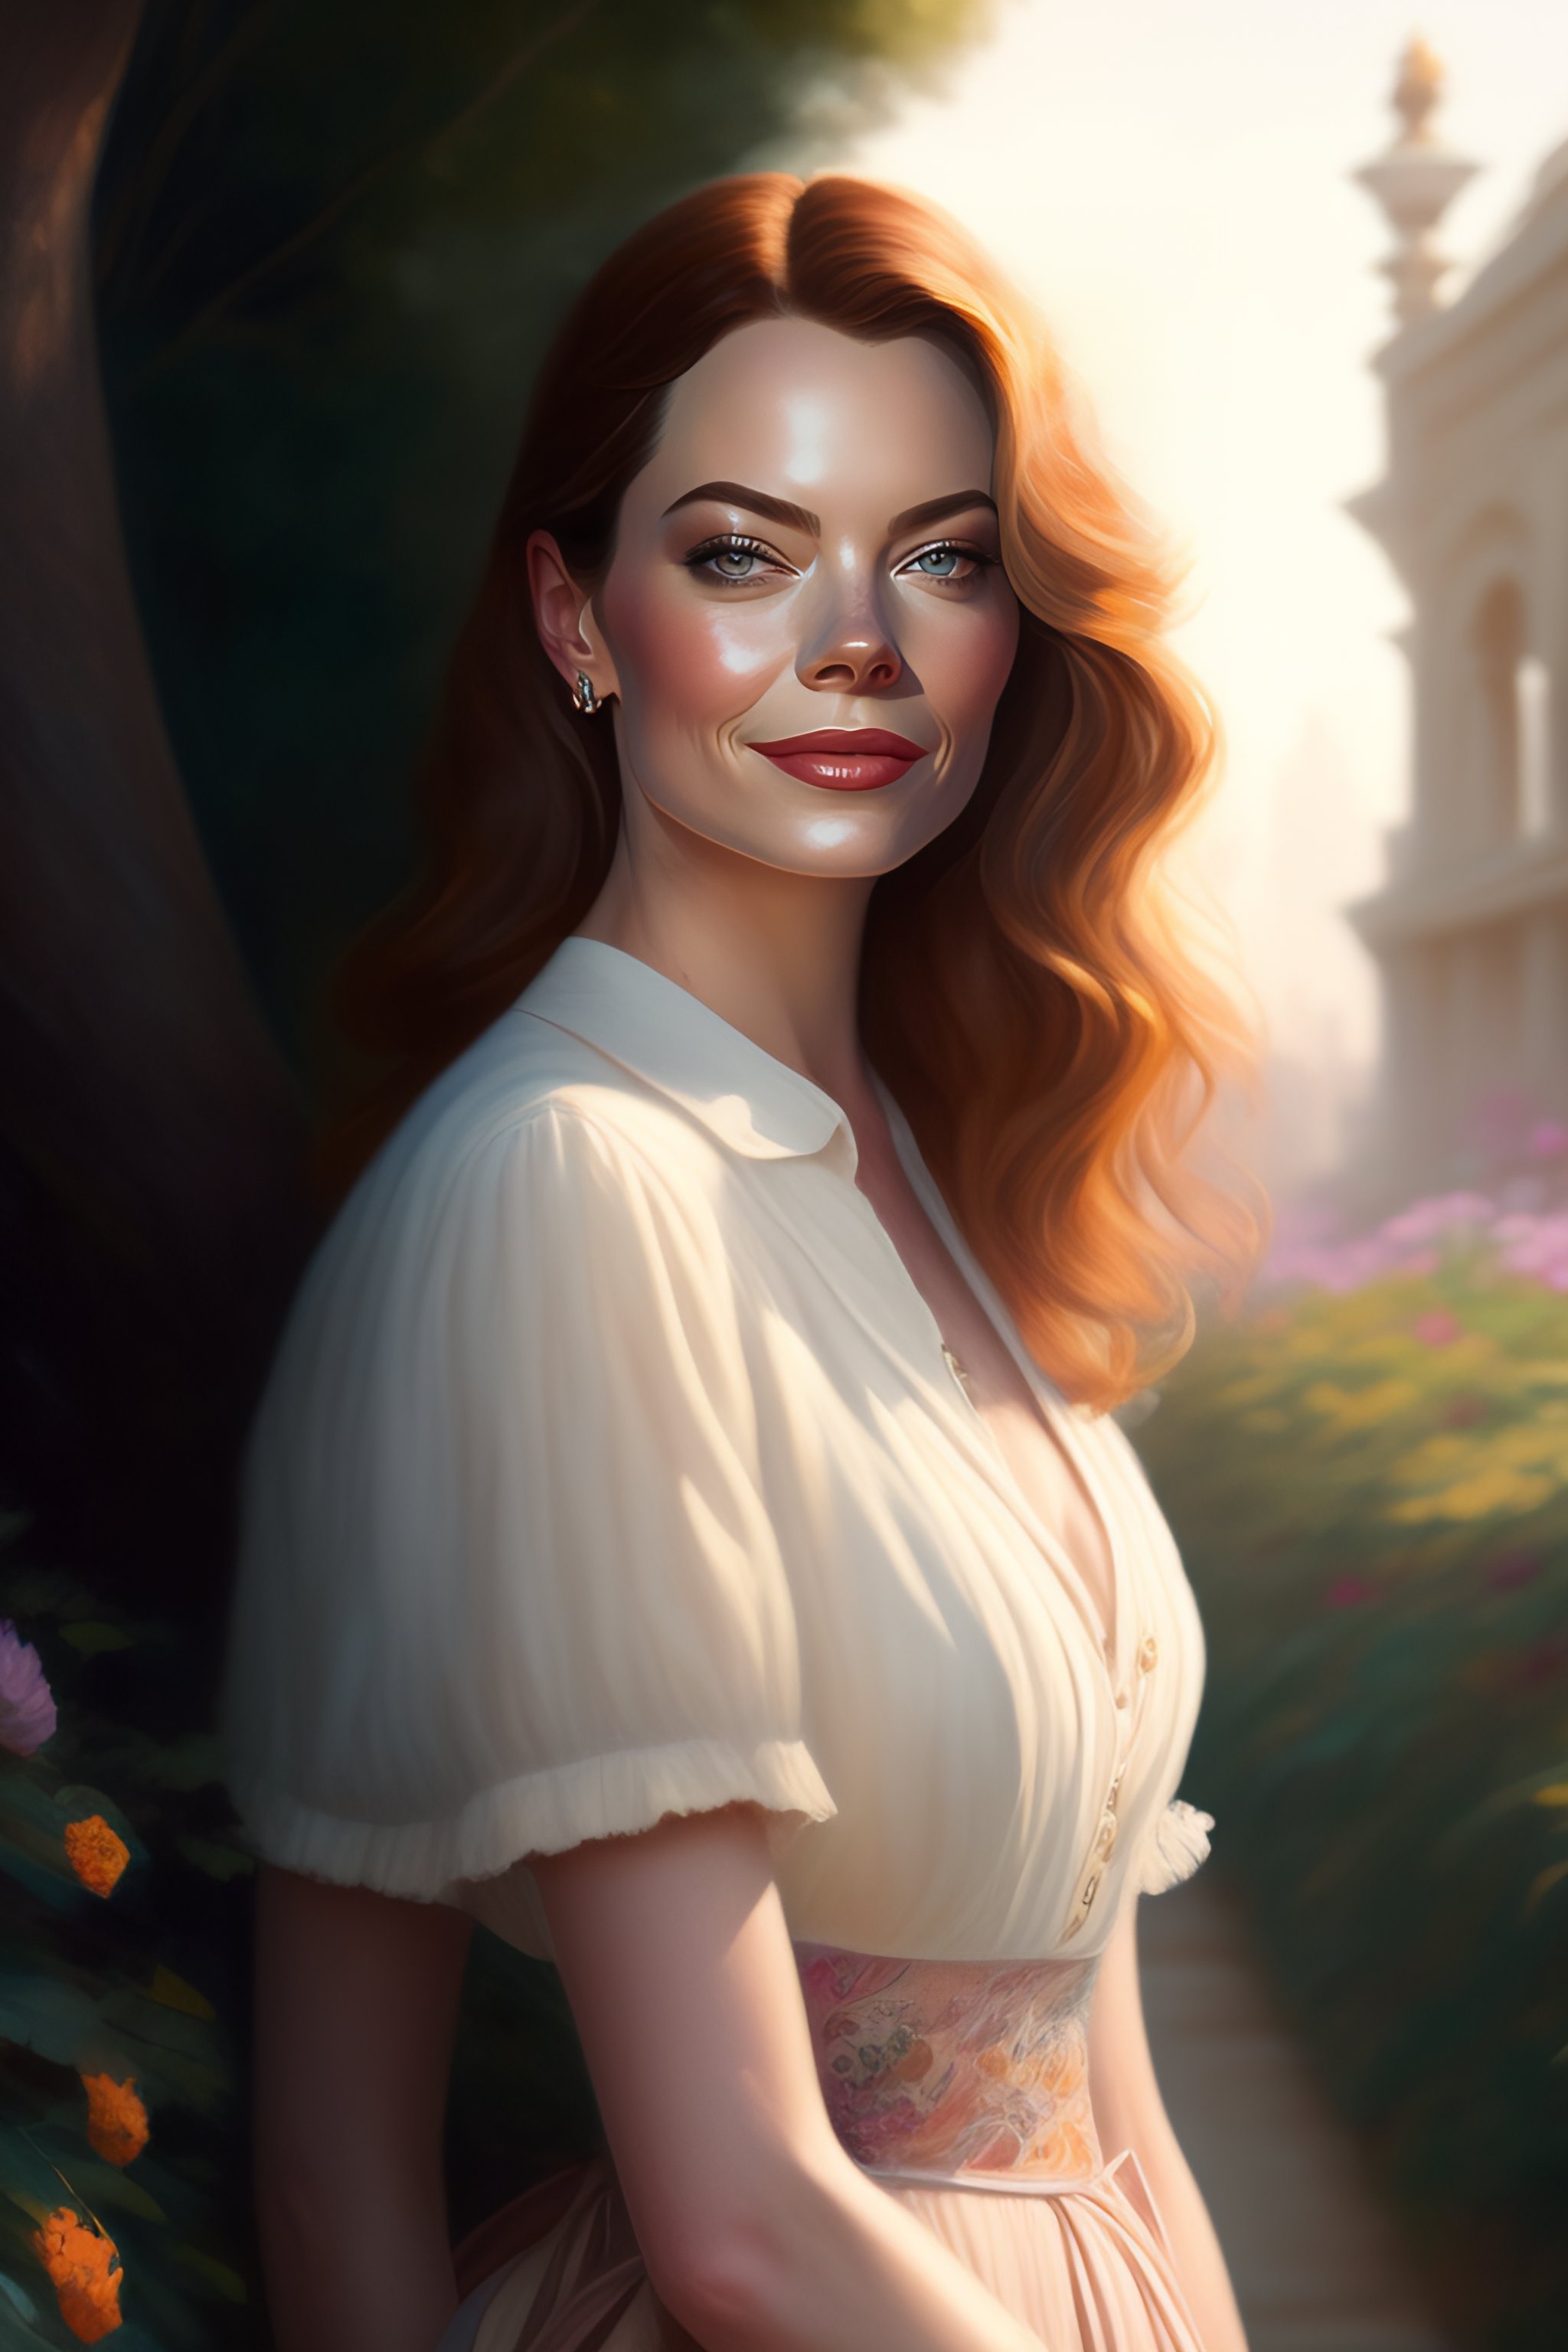 Lexica - Portrait of a middle-aged woman based on Emma Stone in